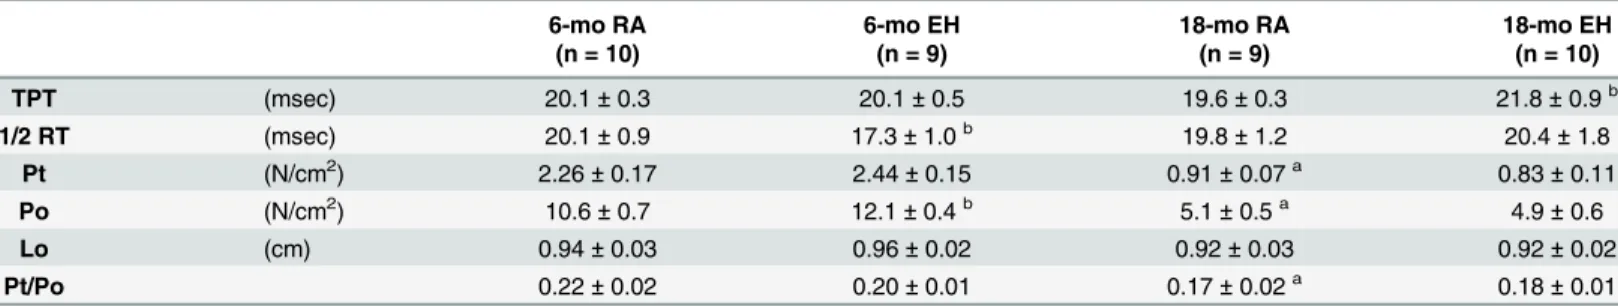 Table 5. In-vitro mechanical characteristics of diaphragm muscle of 6-mo and 18-mo old mdx mice exposed to RA and EH for 12 weeks.